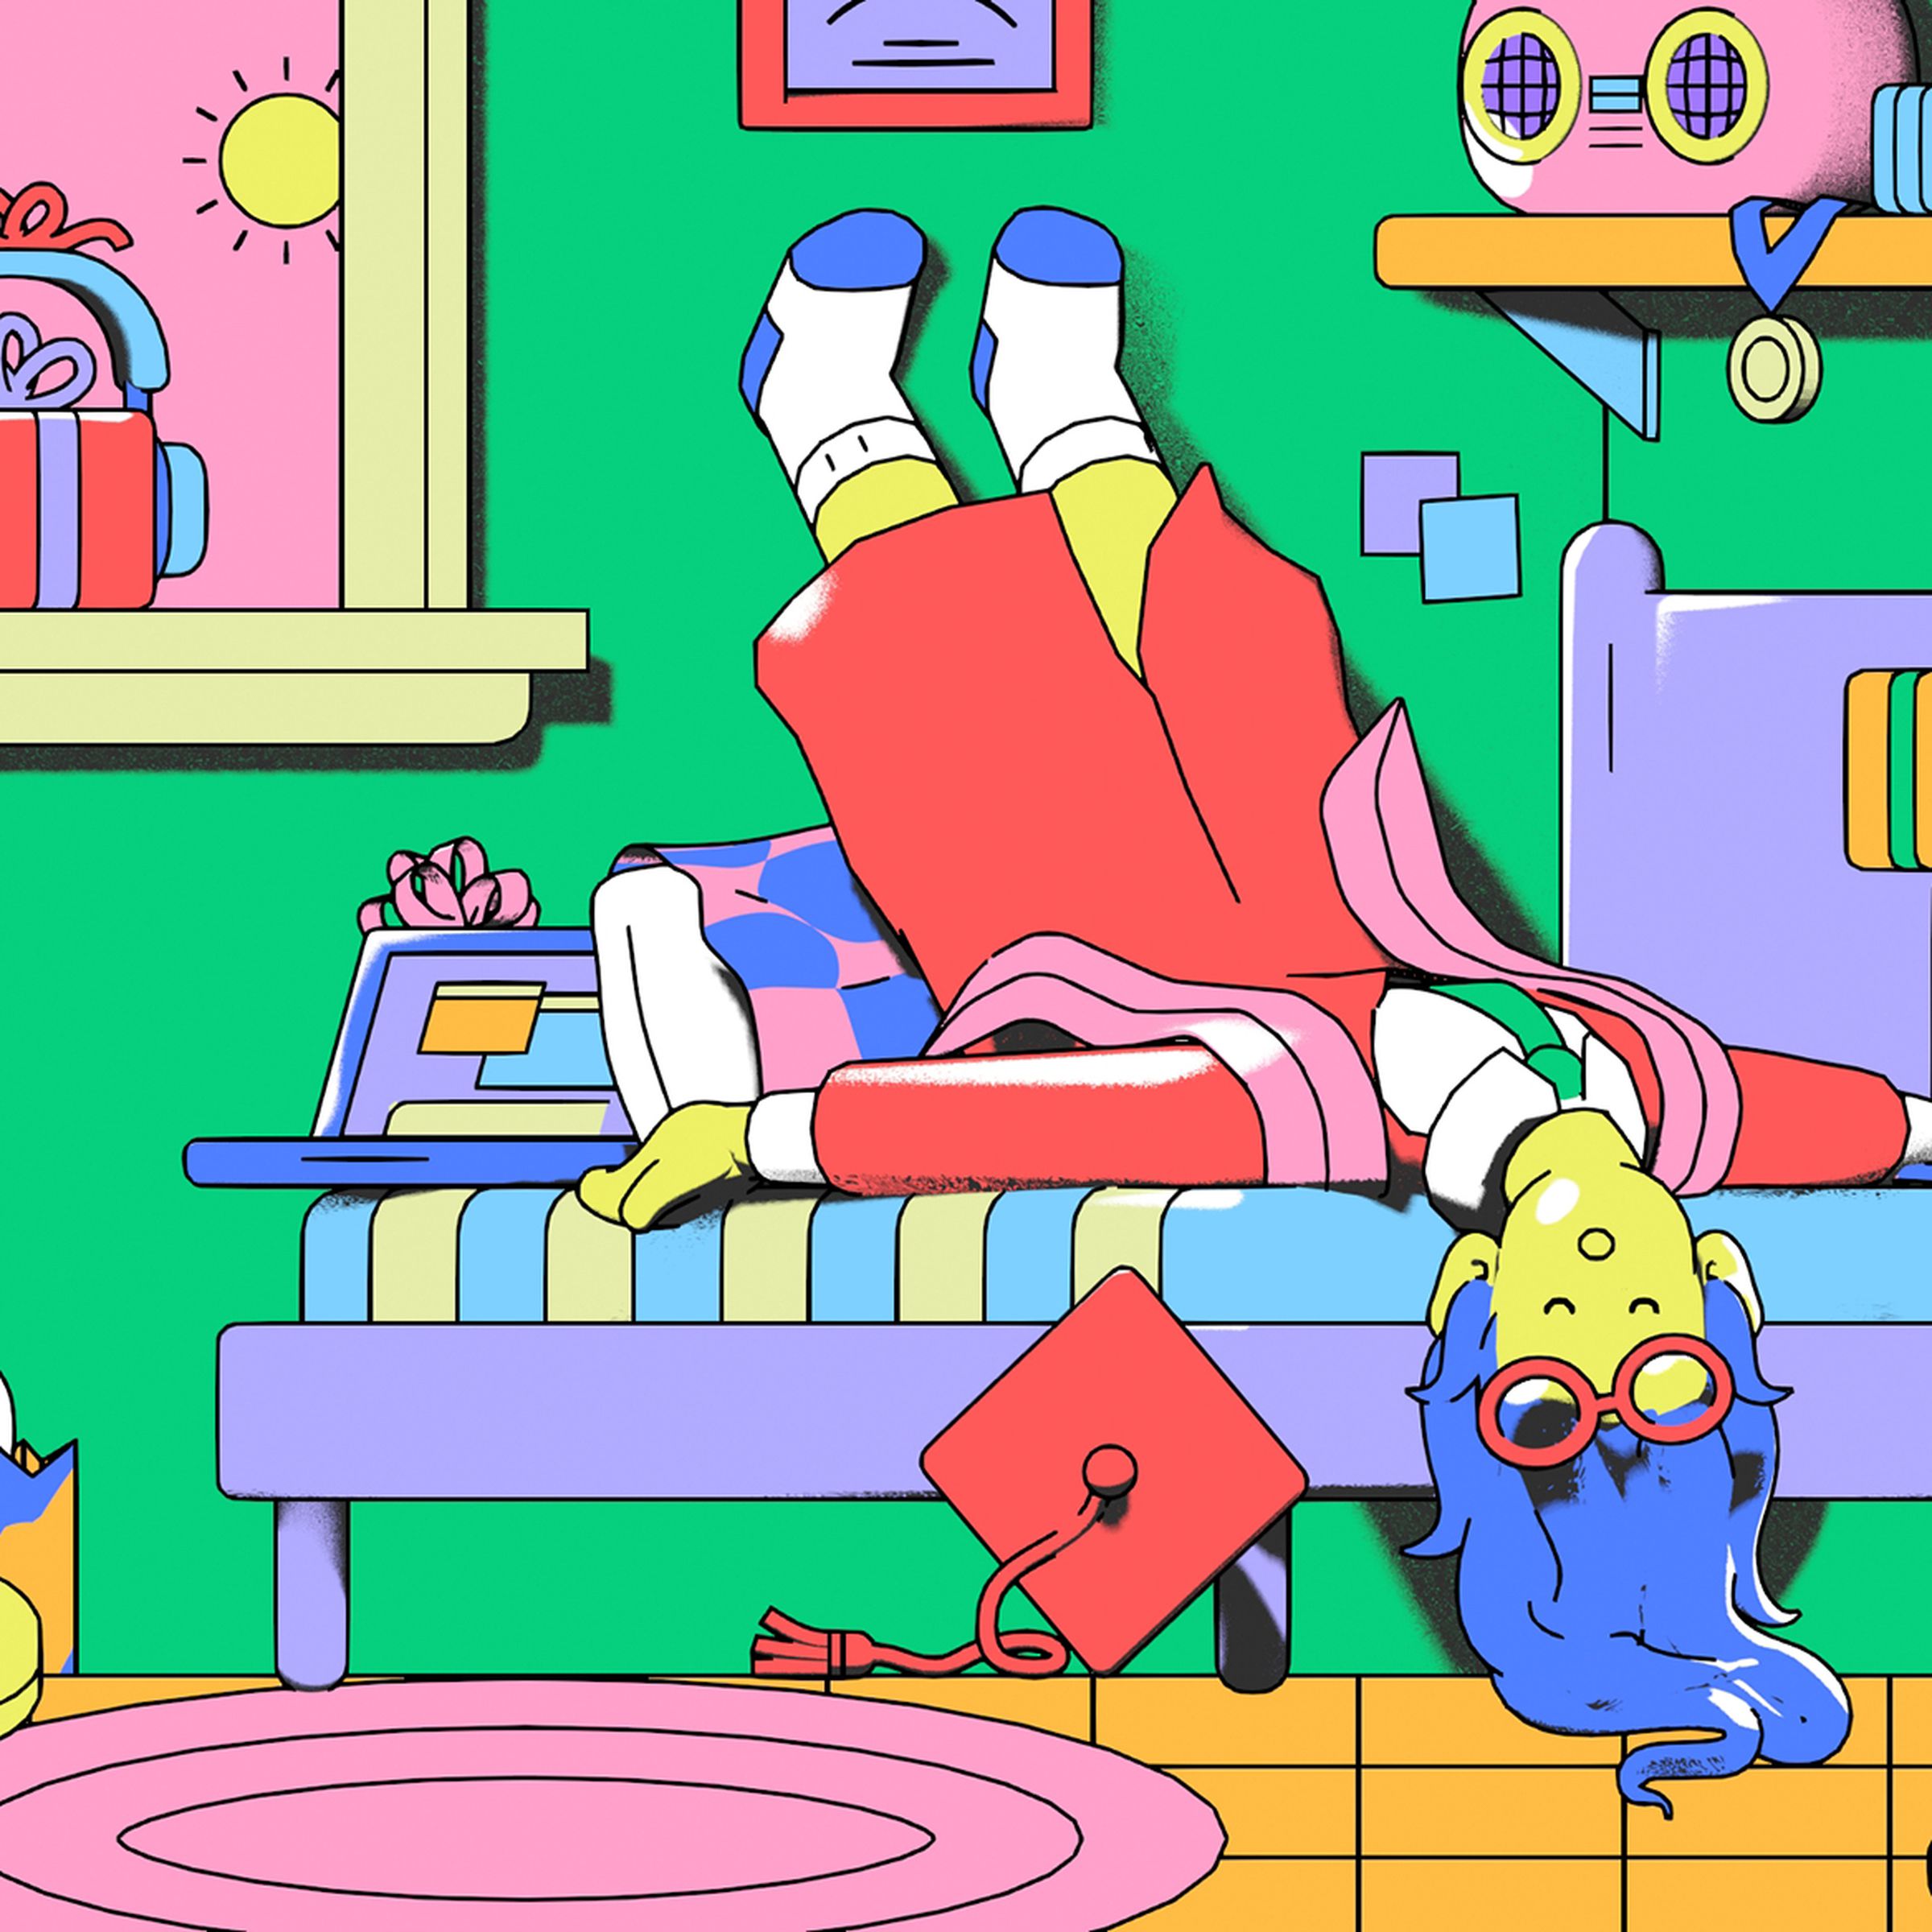 Animated illustration of a napping graduate catching up on sleep, surrounded by gifts.